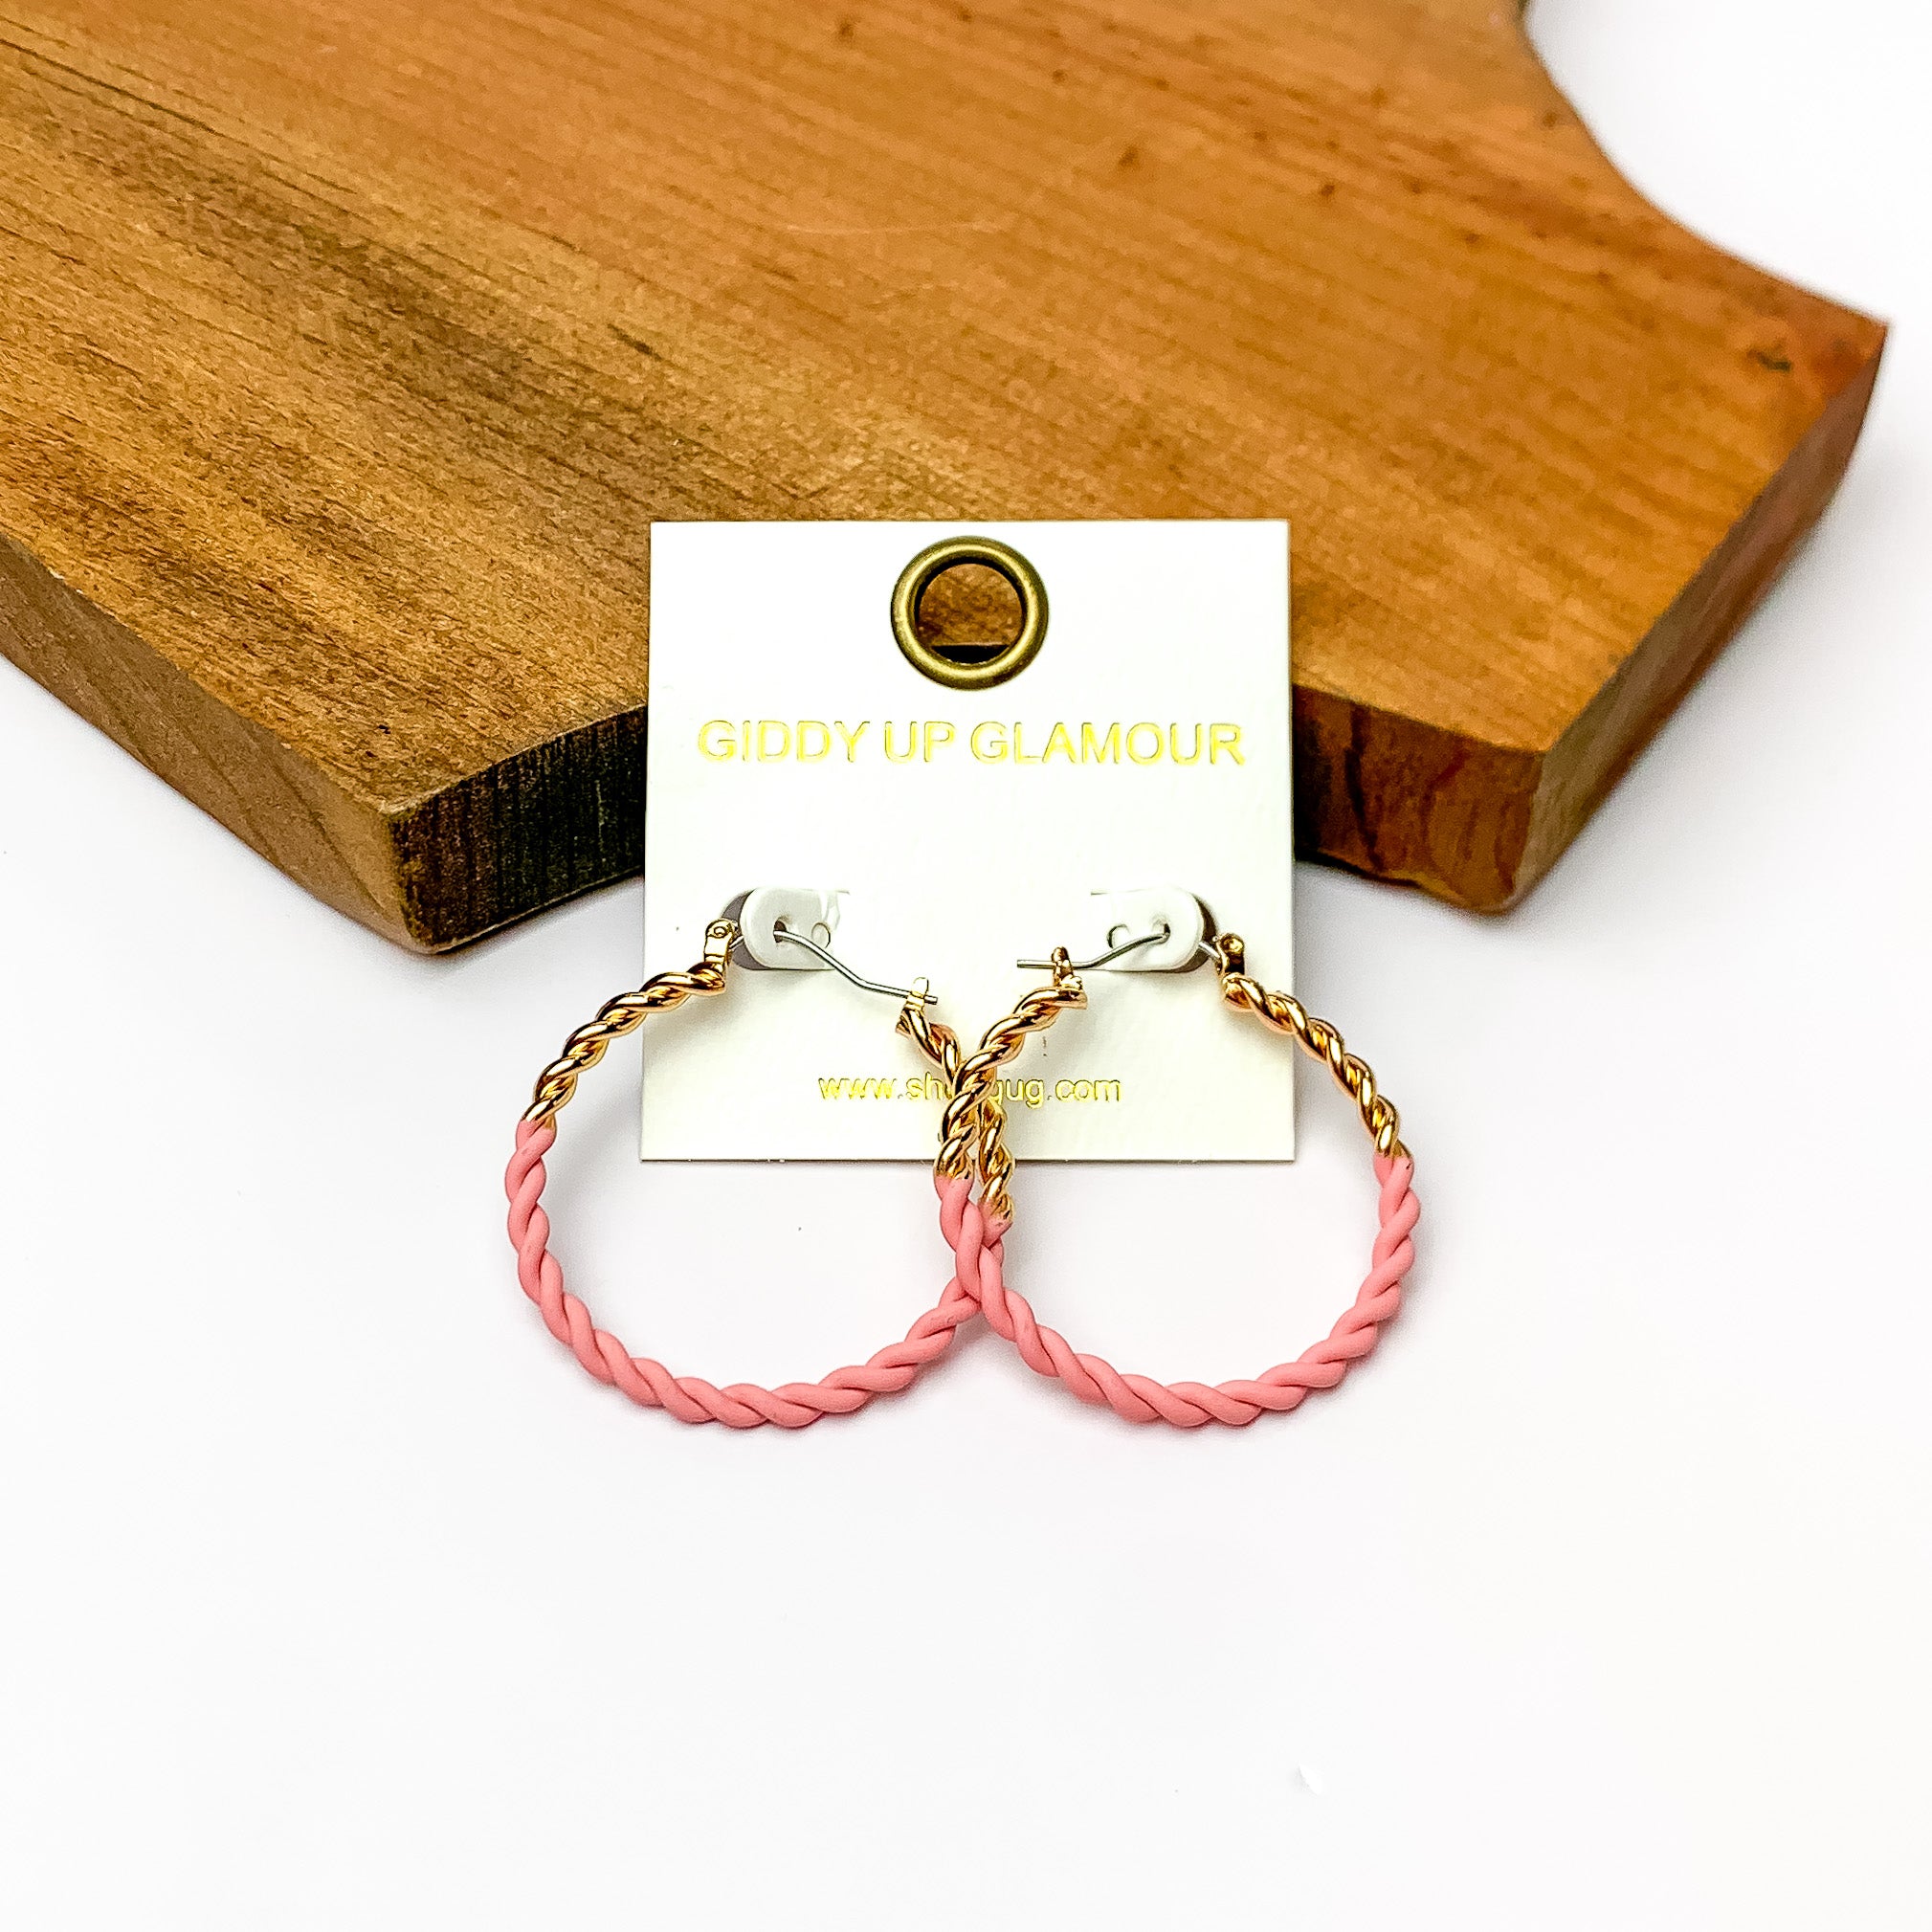 Twisted Gold Tone Hoop Earrings in Light Pink. Pictured on a white background with a wood piece behind the earrings.